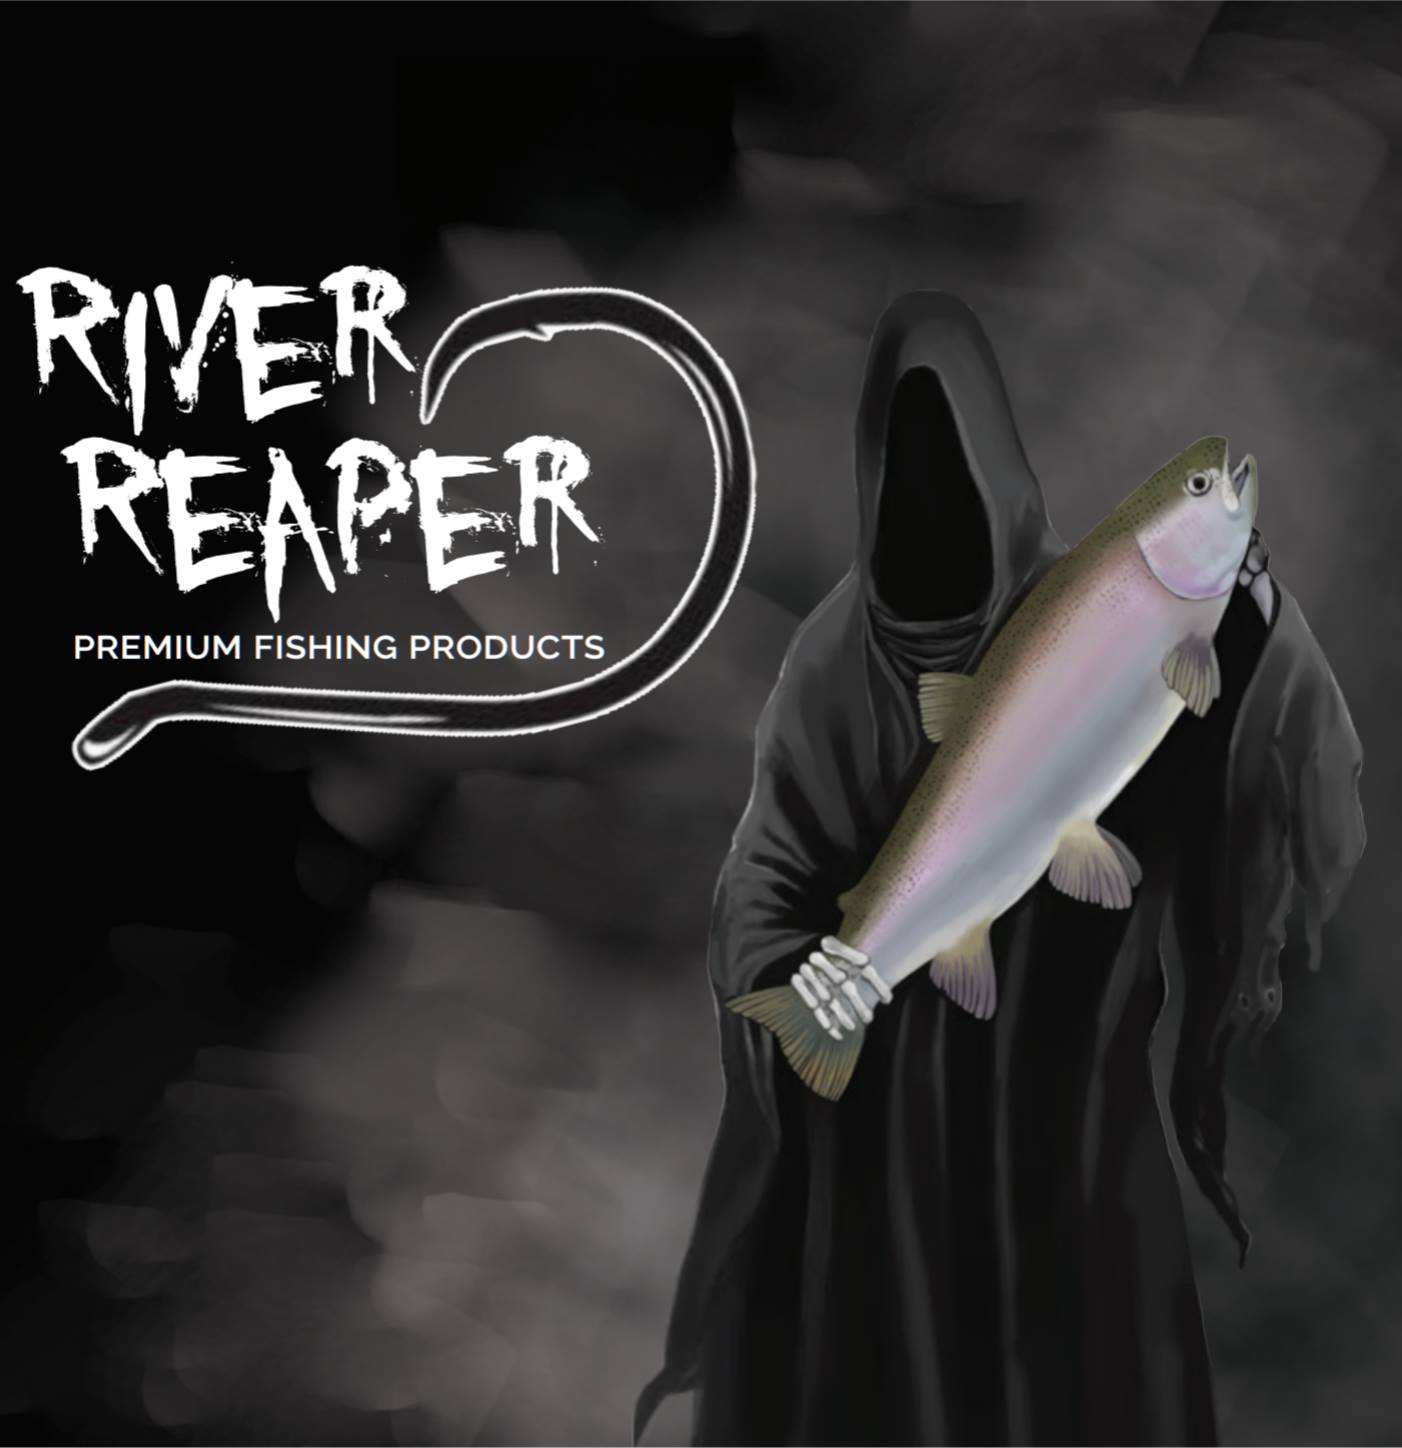 River Reaper Premium Fishing Products